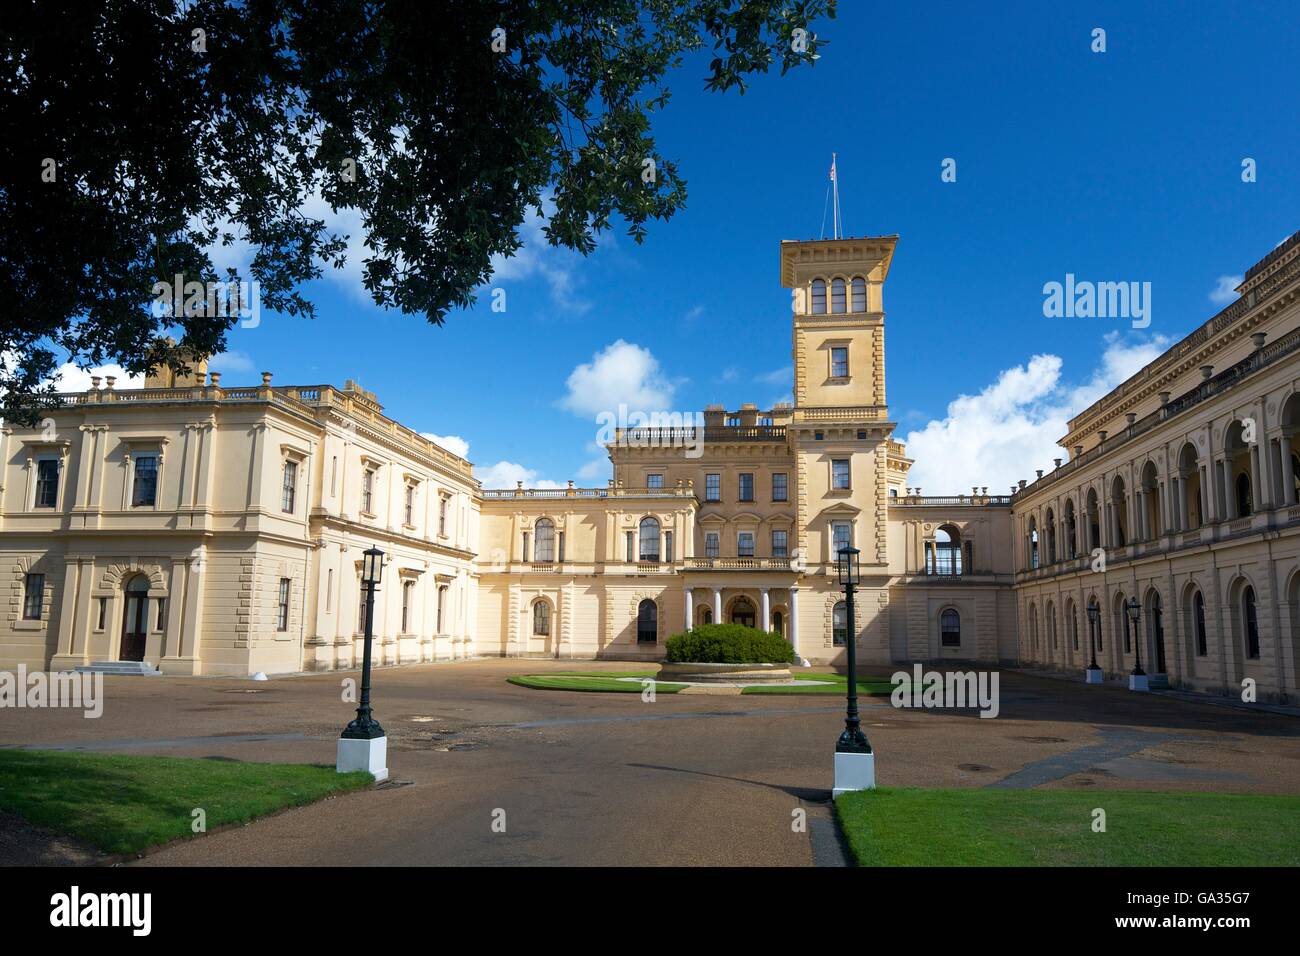 Osborne House, former royal residence, built 1845-1851 for Queen Victoria and Prince Albert, East Cowes, Isle of Wight, England, Stock Photo